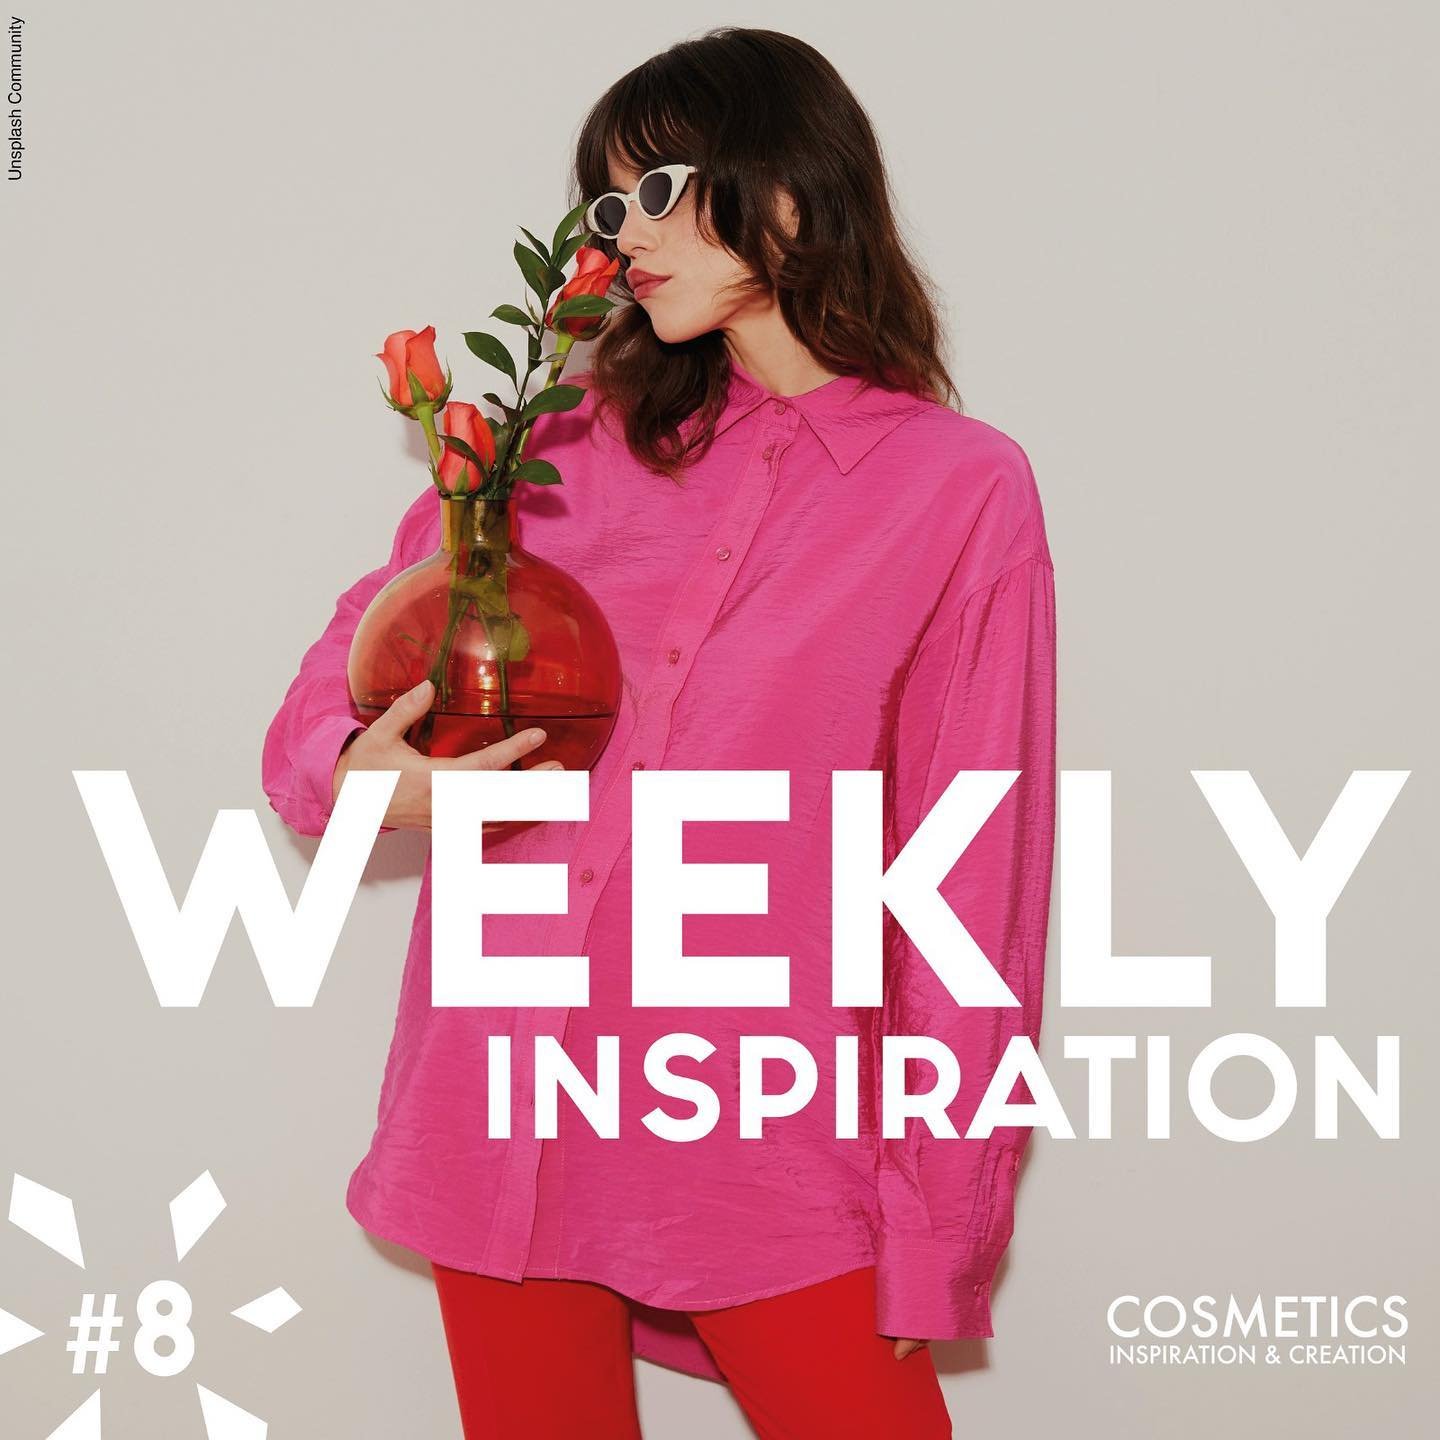 Weekly Inspiration #8 - a curation of beauty, fashion and retails news. Find us on X, LinkedIn &amp; TikTok to be updated on all the inspiring news.

@skims, as the WNBA&rsquo;s Official Underwear Partner, reinforces its sports spirit with a new camp